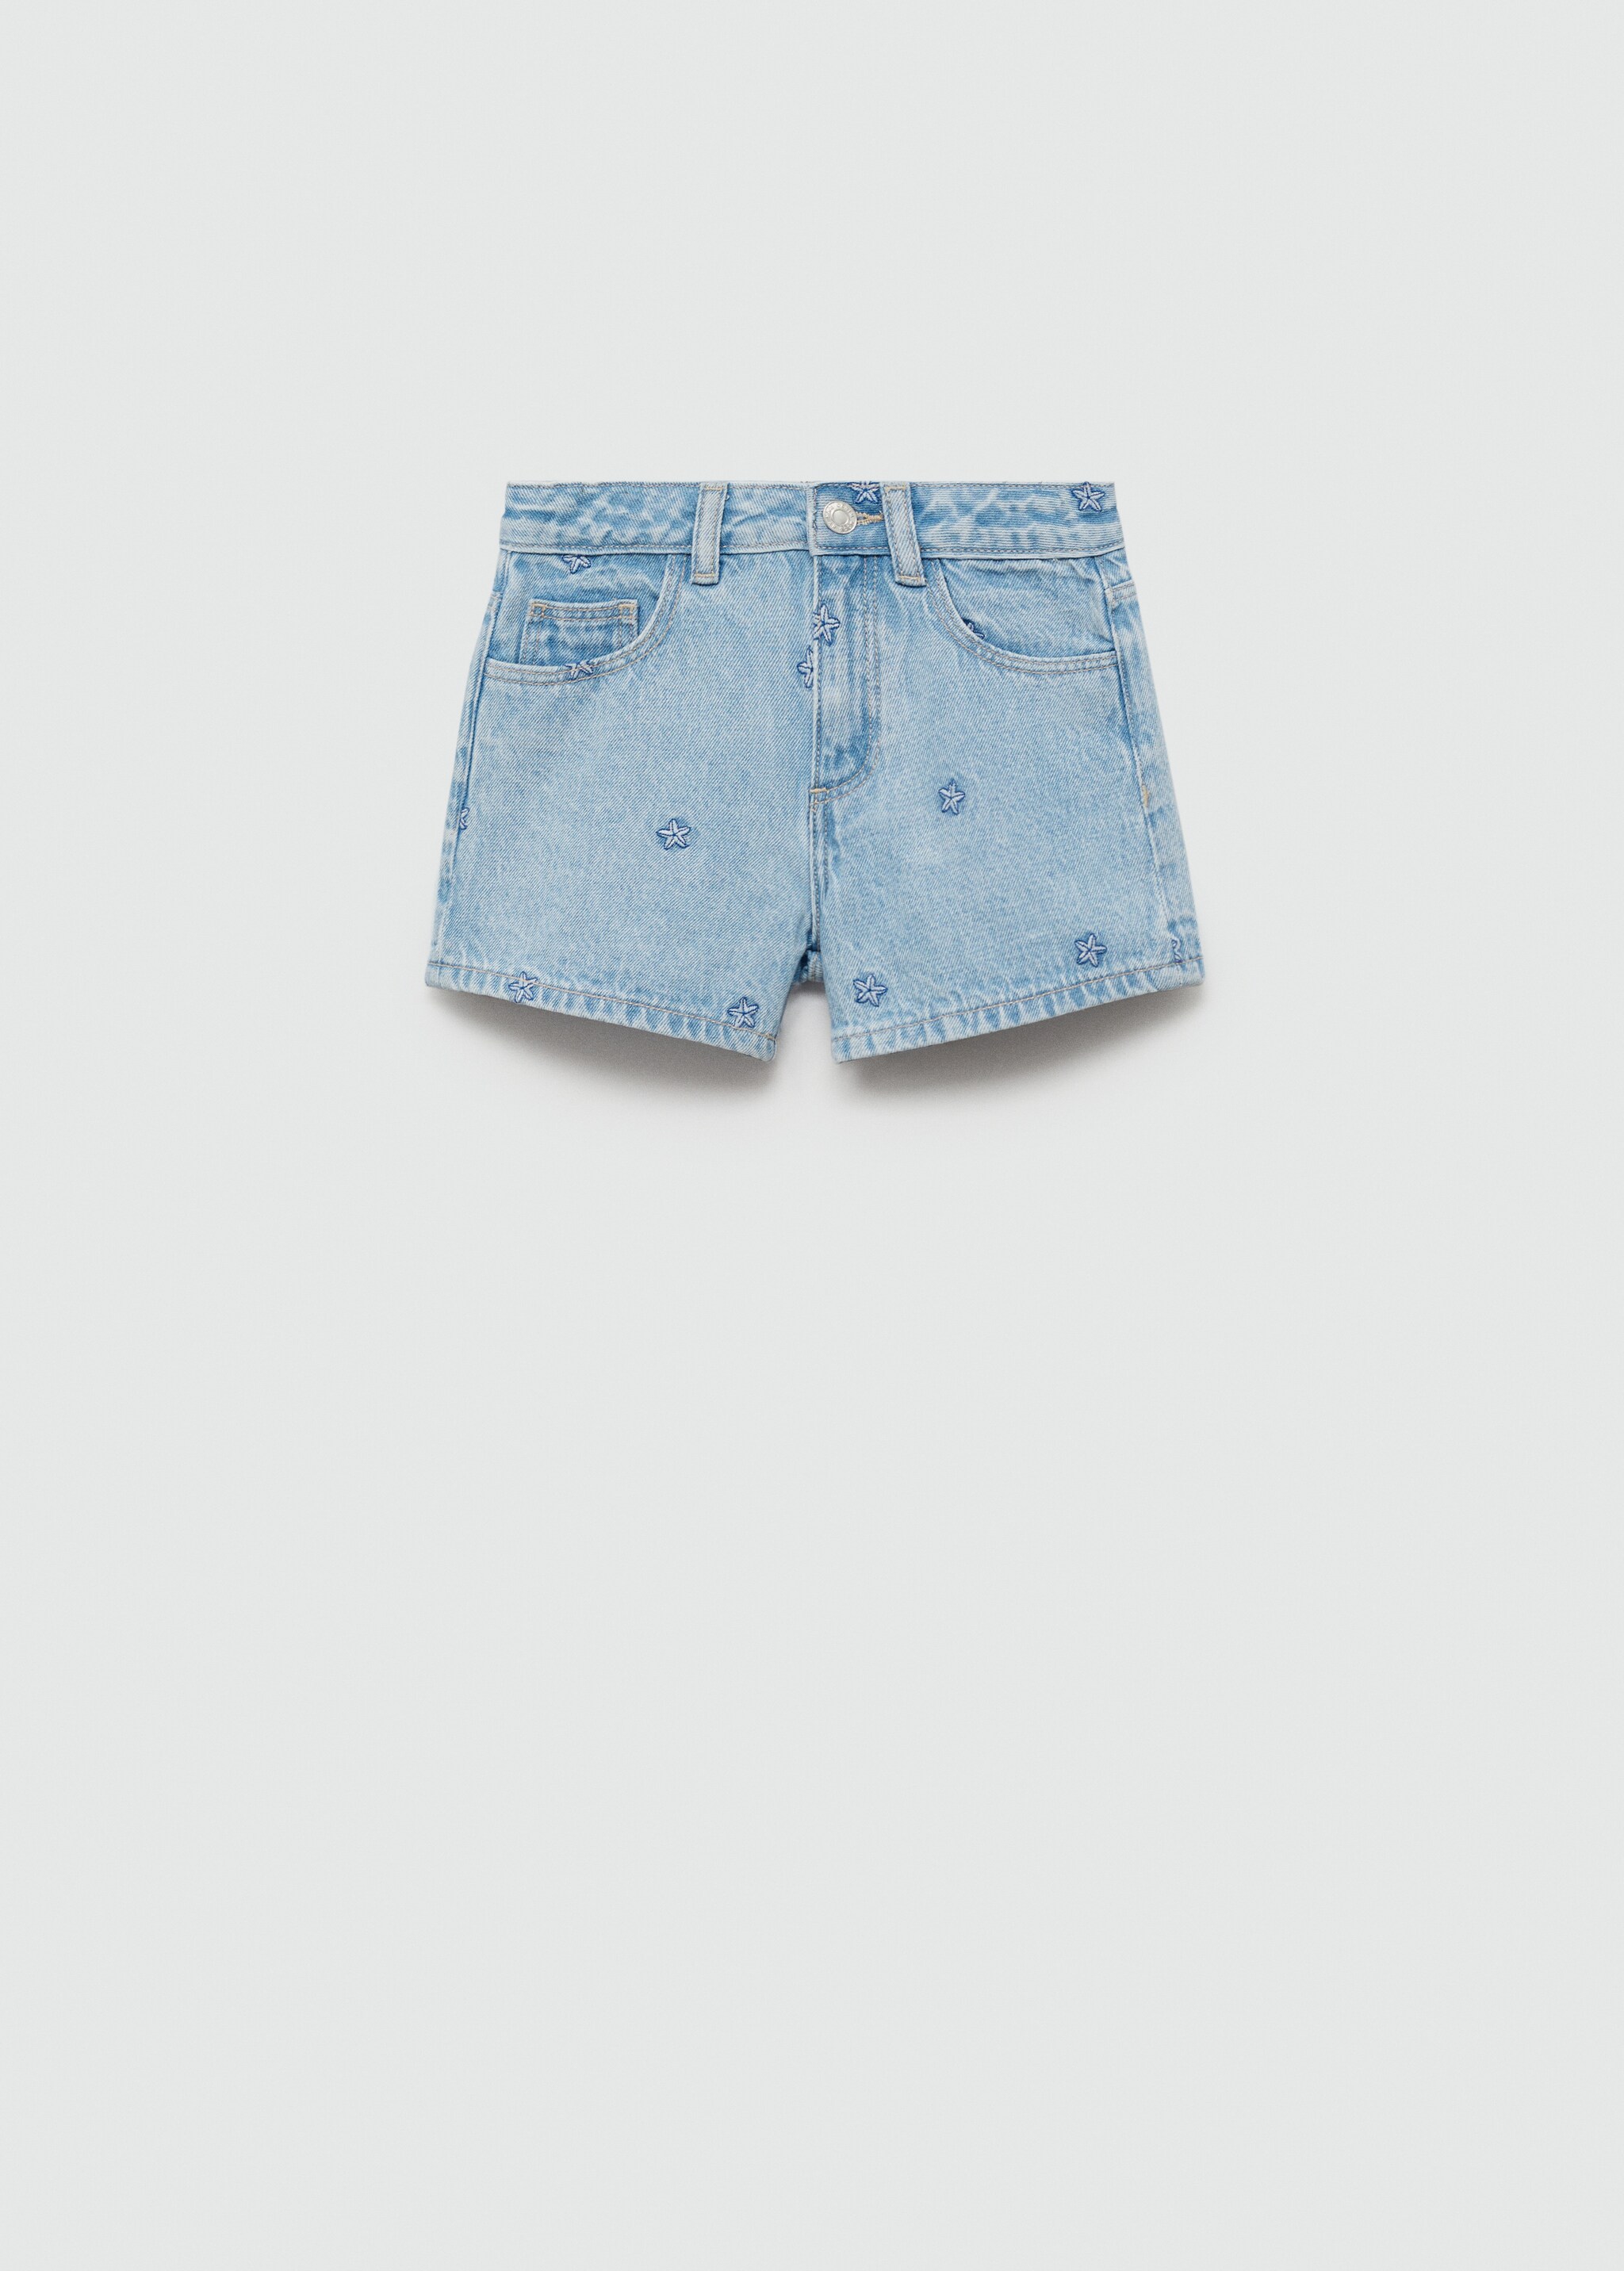 Starfish denim shorts - Article without model